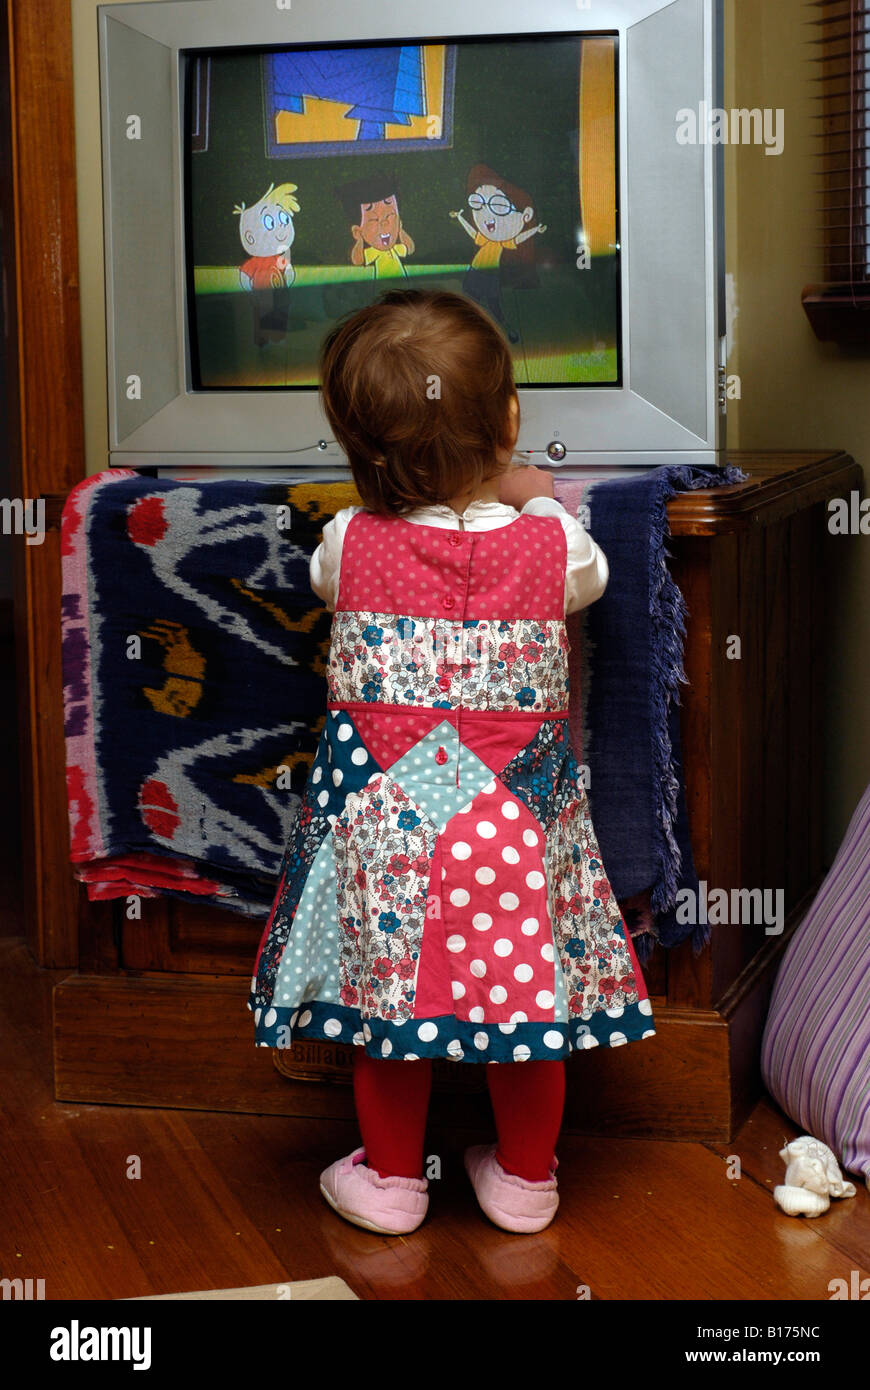 An 18 month old girl standing in front of a television watching children s cartoons Stock Photo